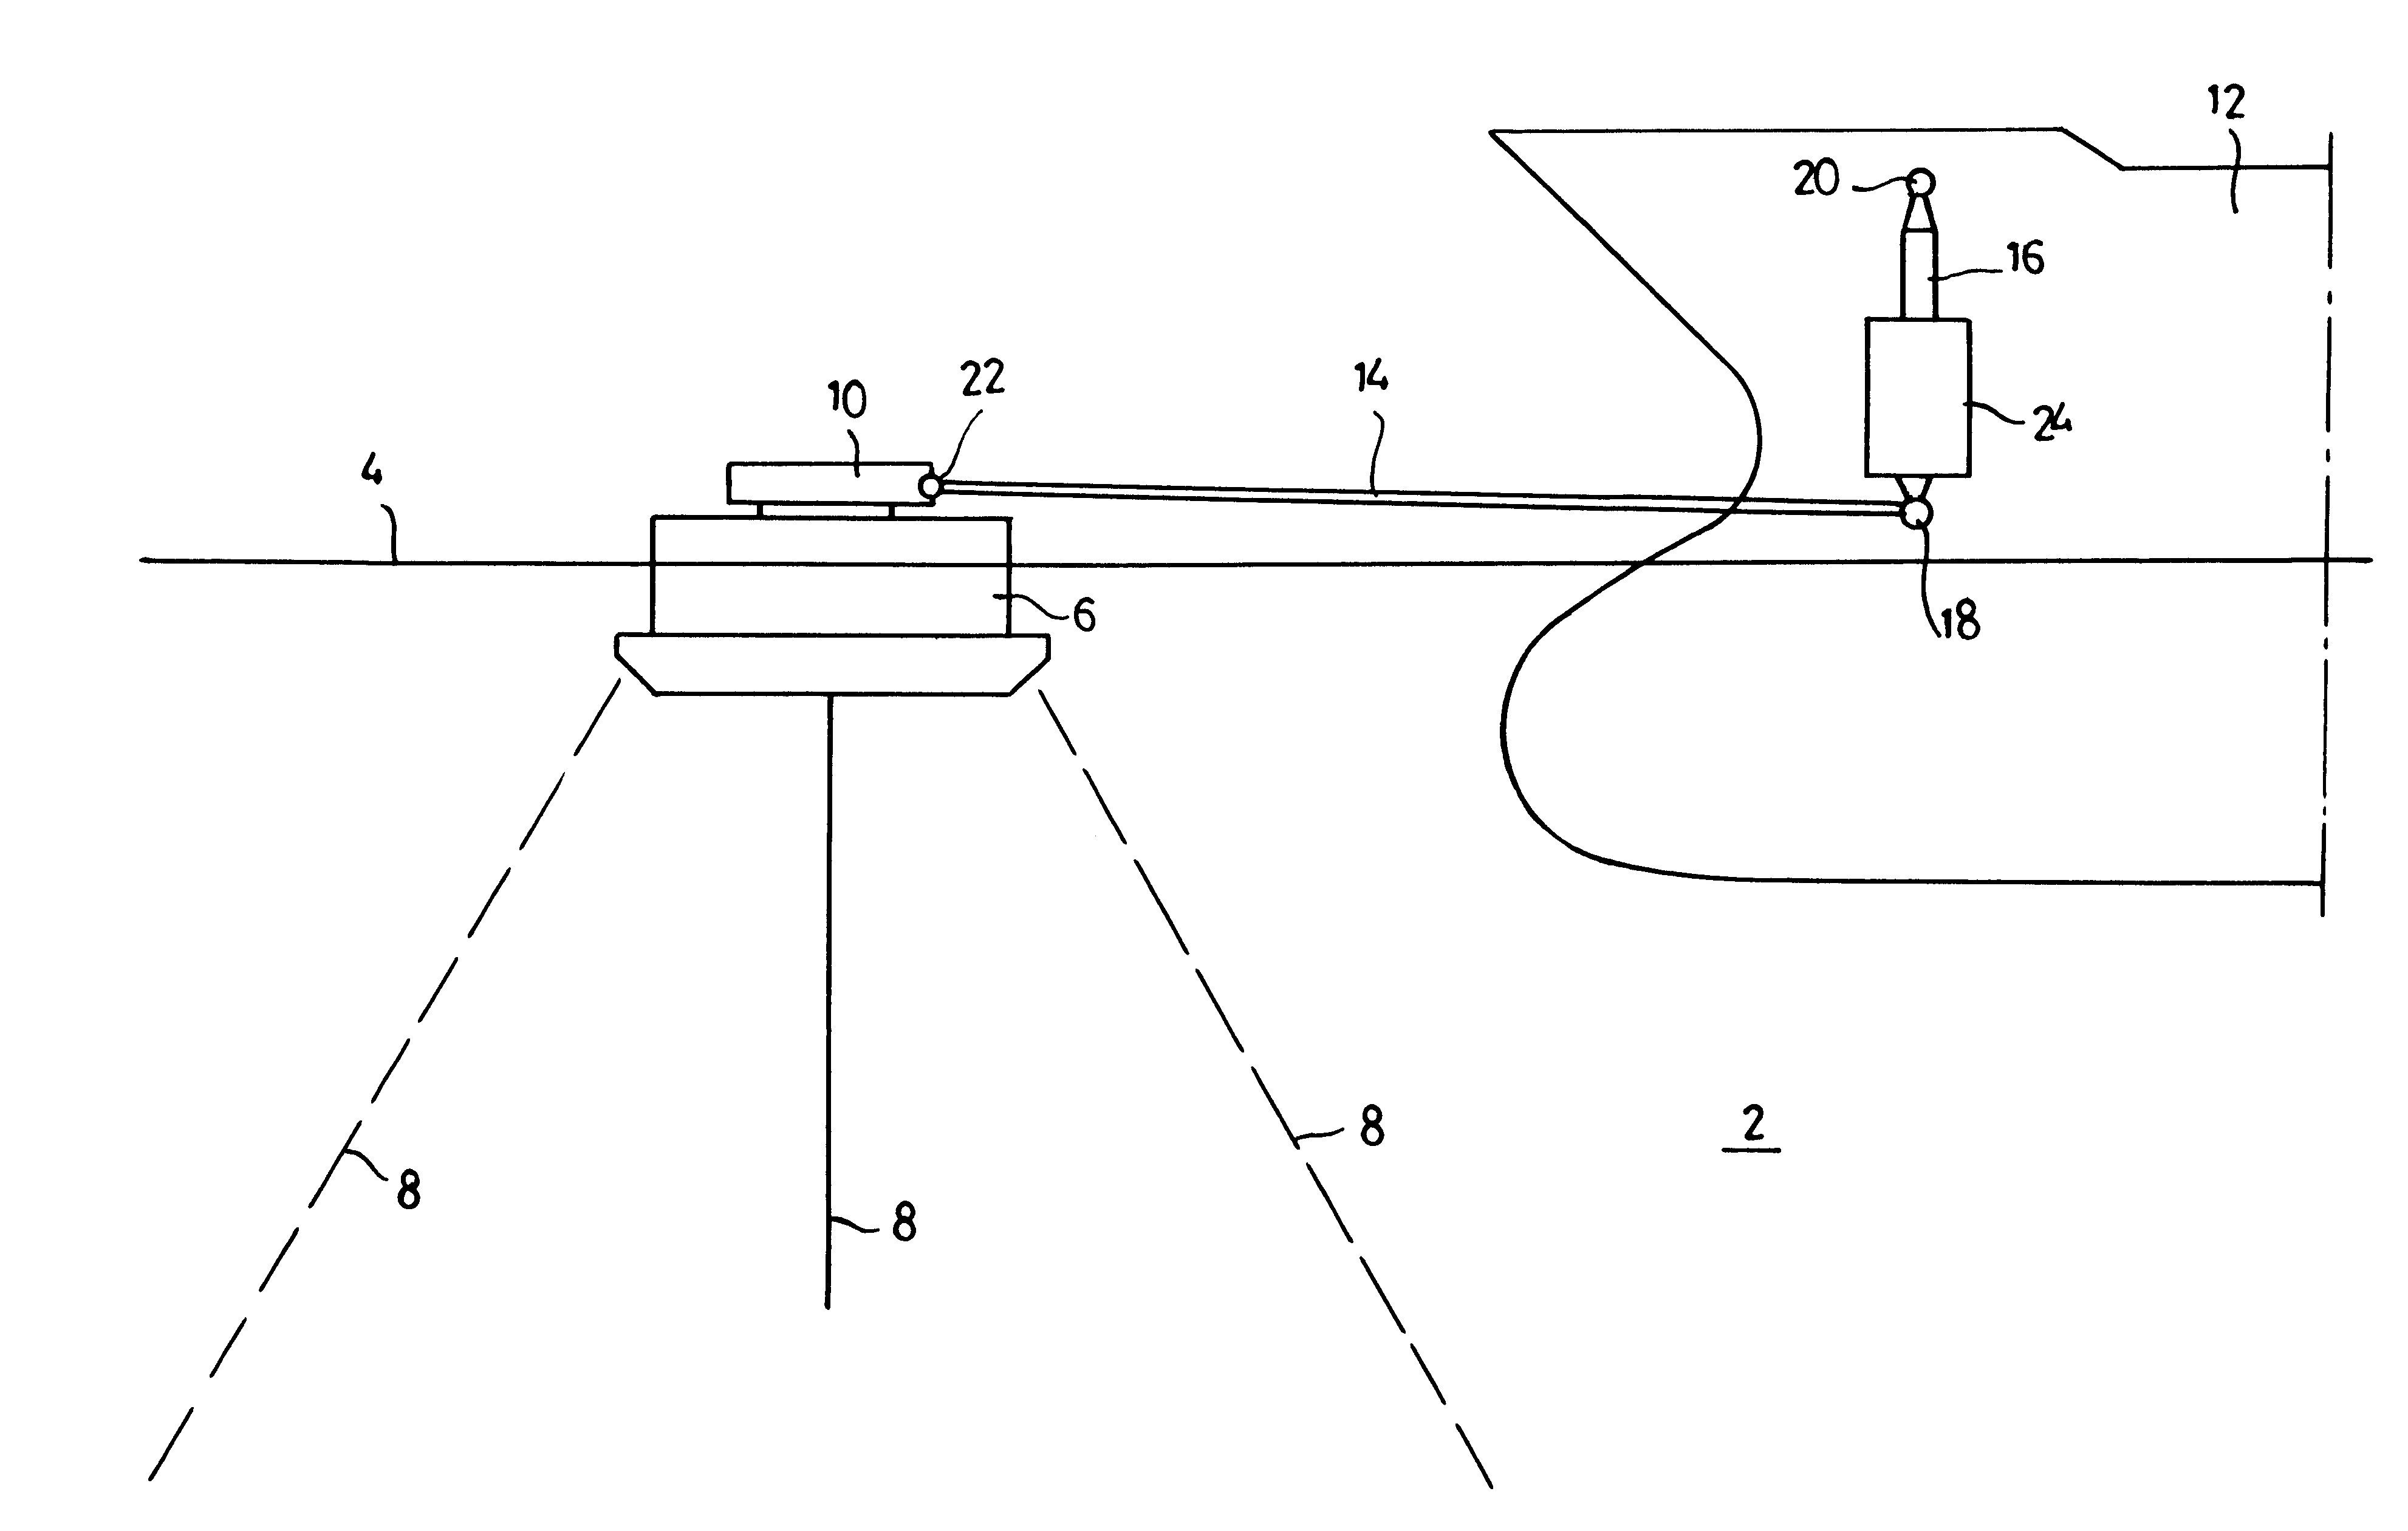 Mooring assembly for mooring a body, floating on a water mass